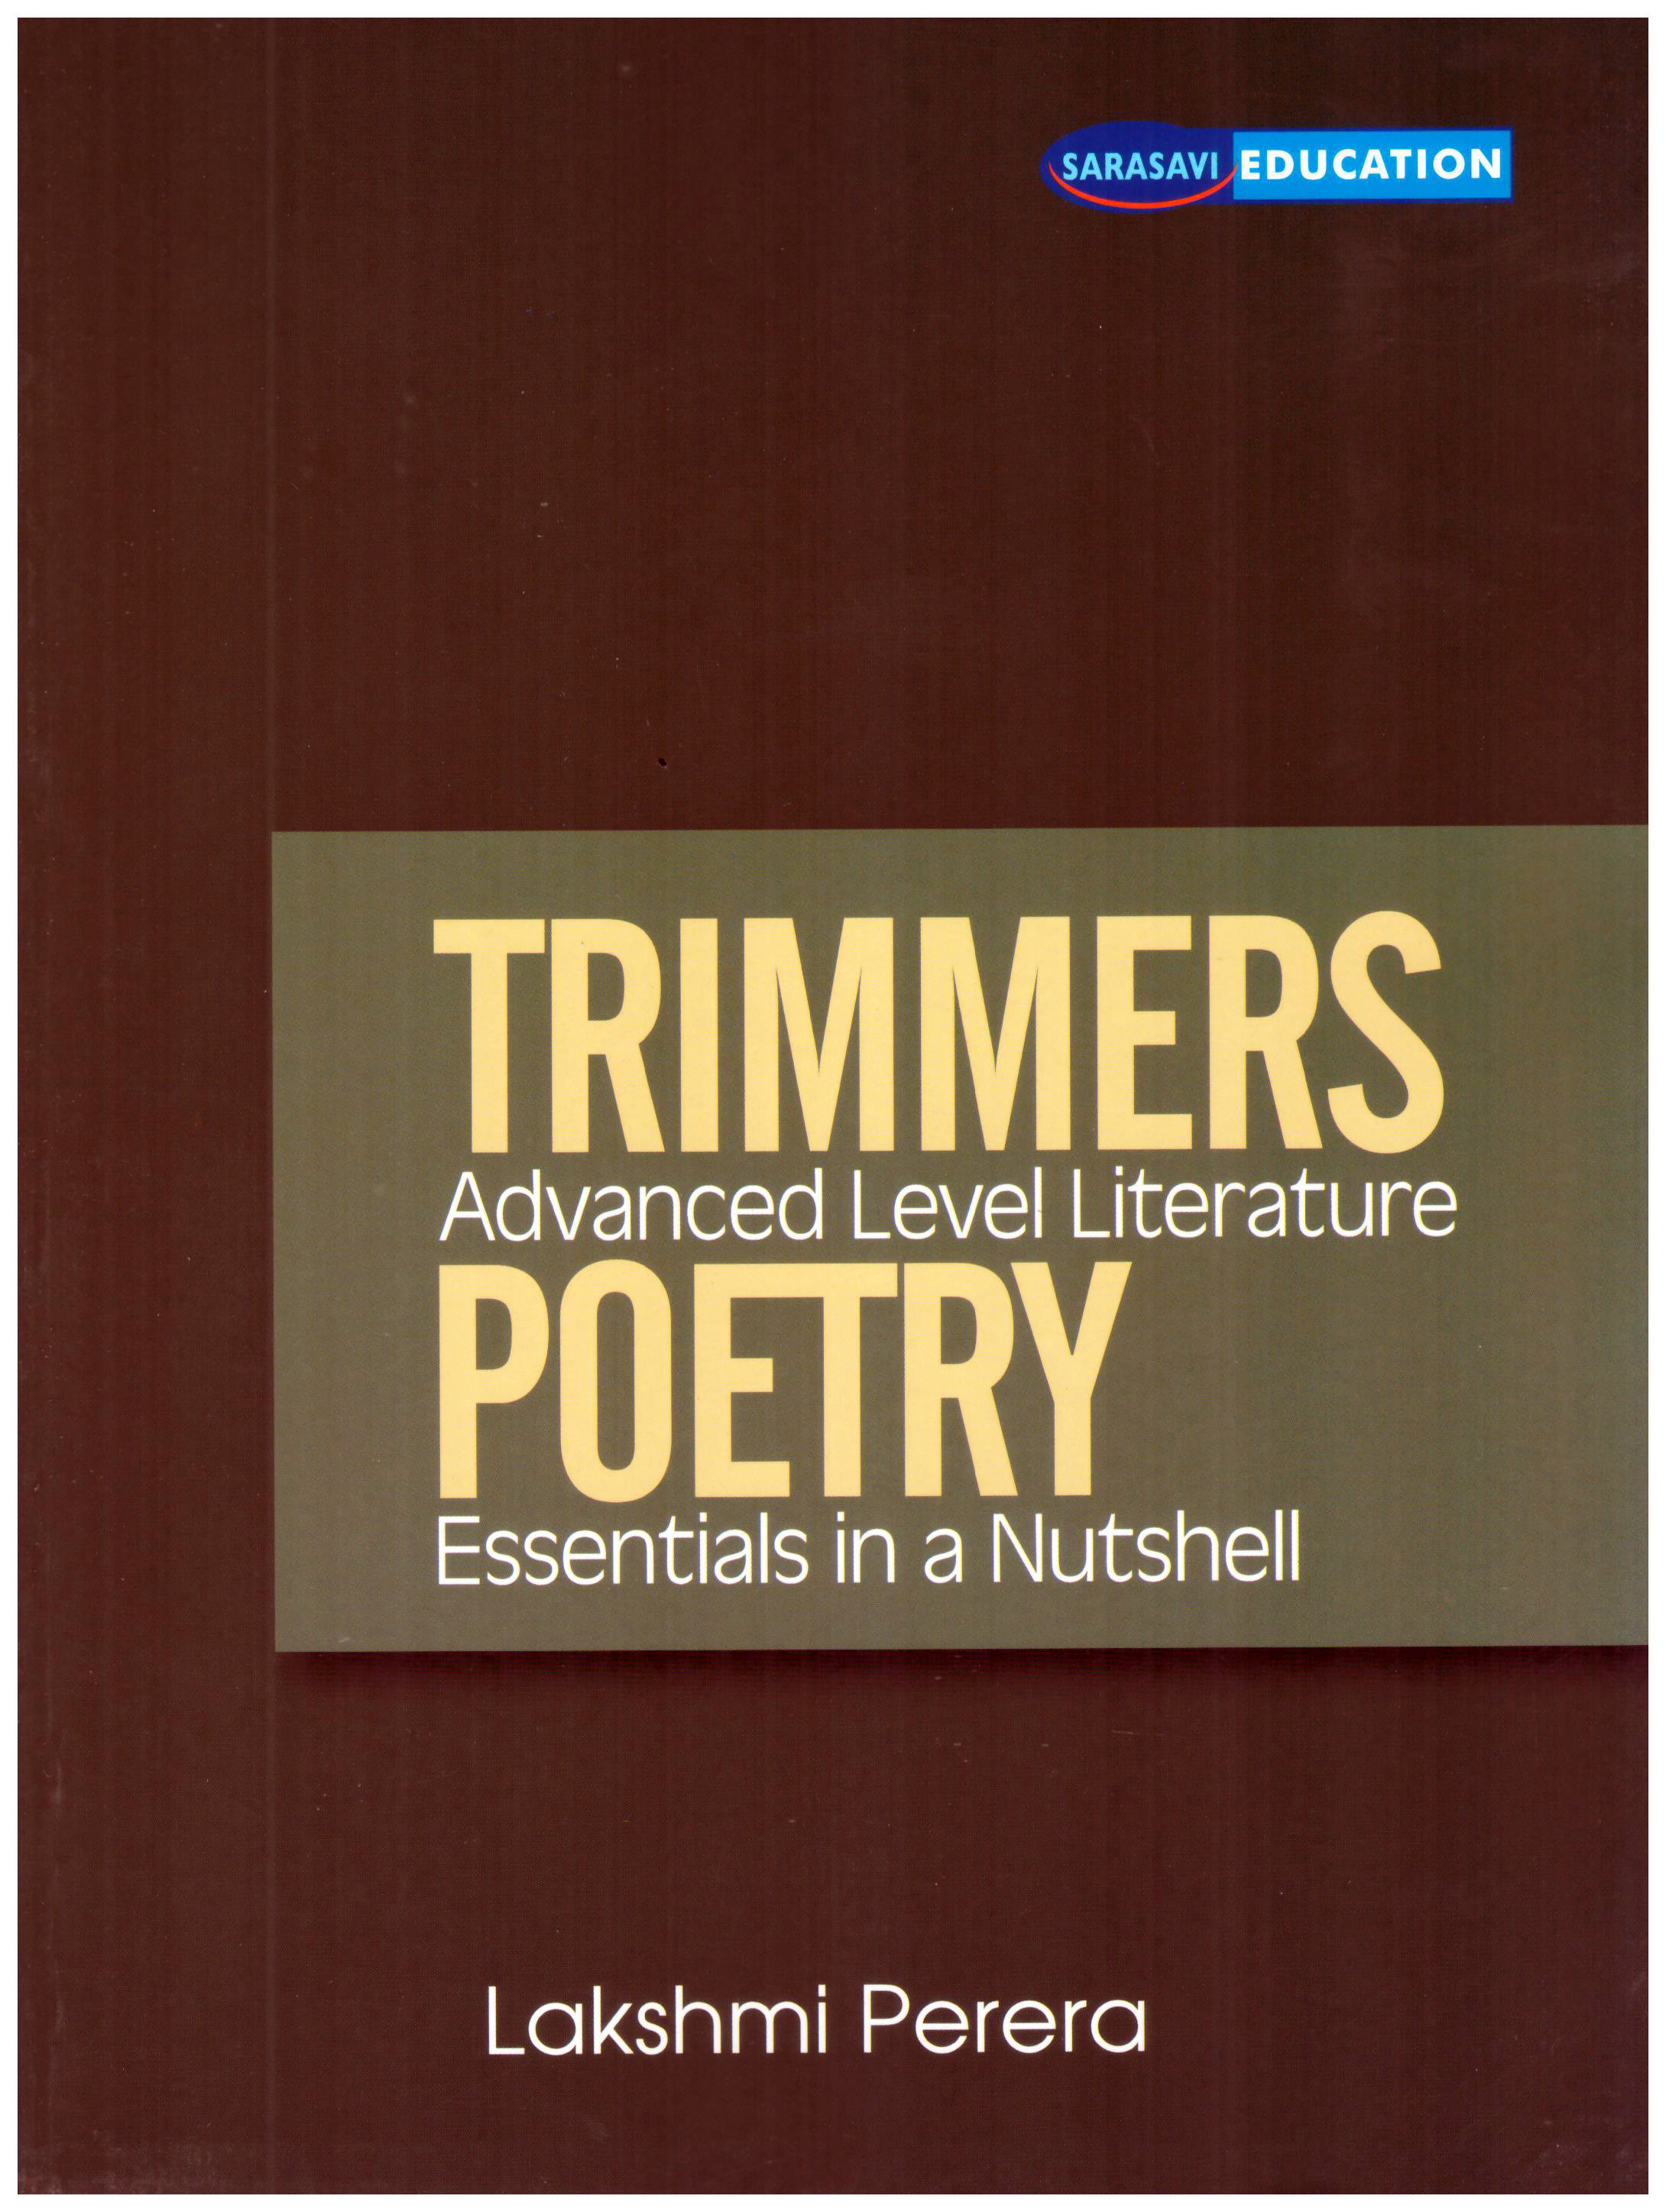 Trimmers Advanced Level Literature Poetry Essentials in a Nutshell